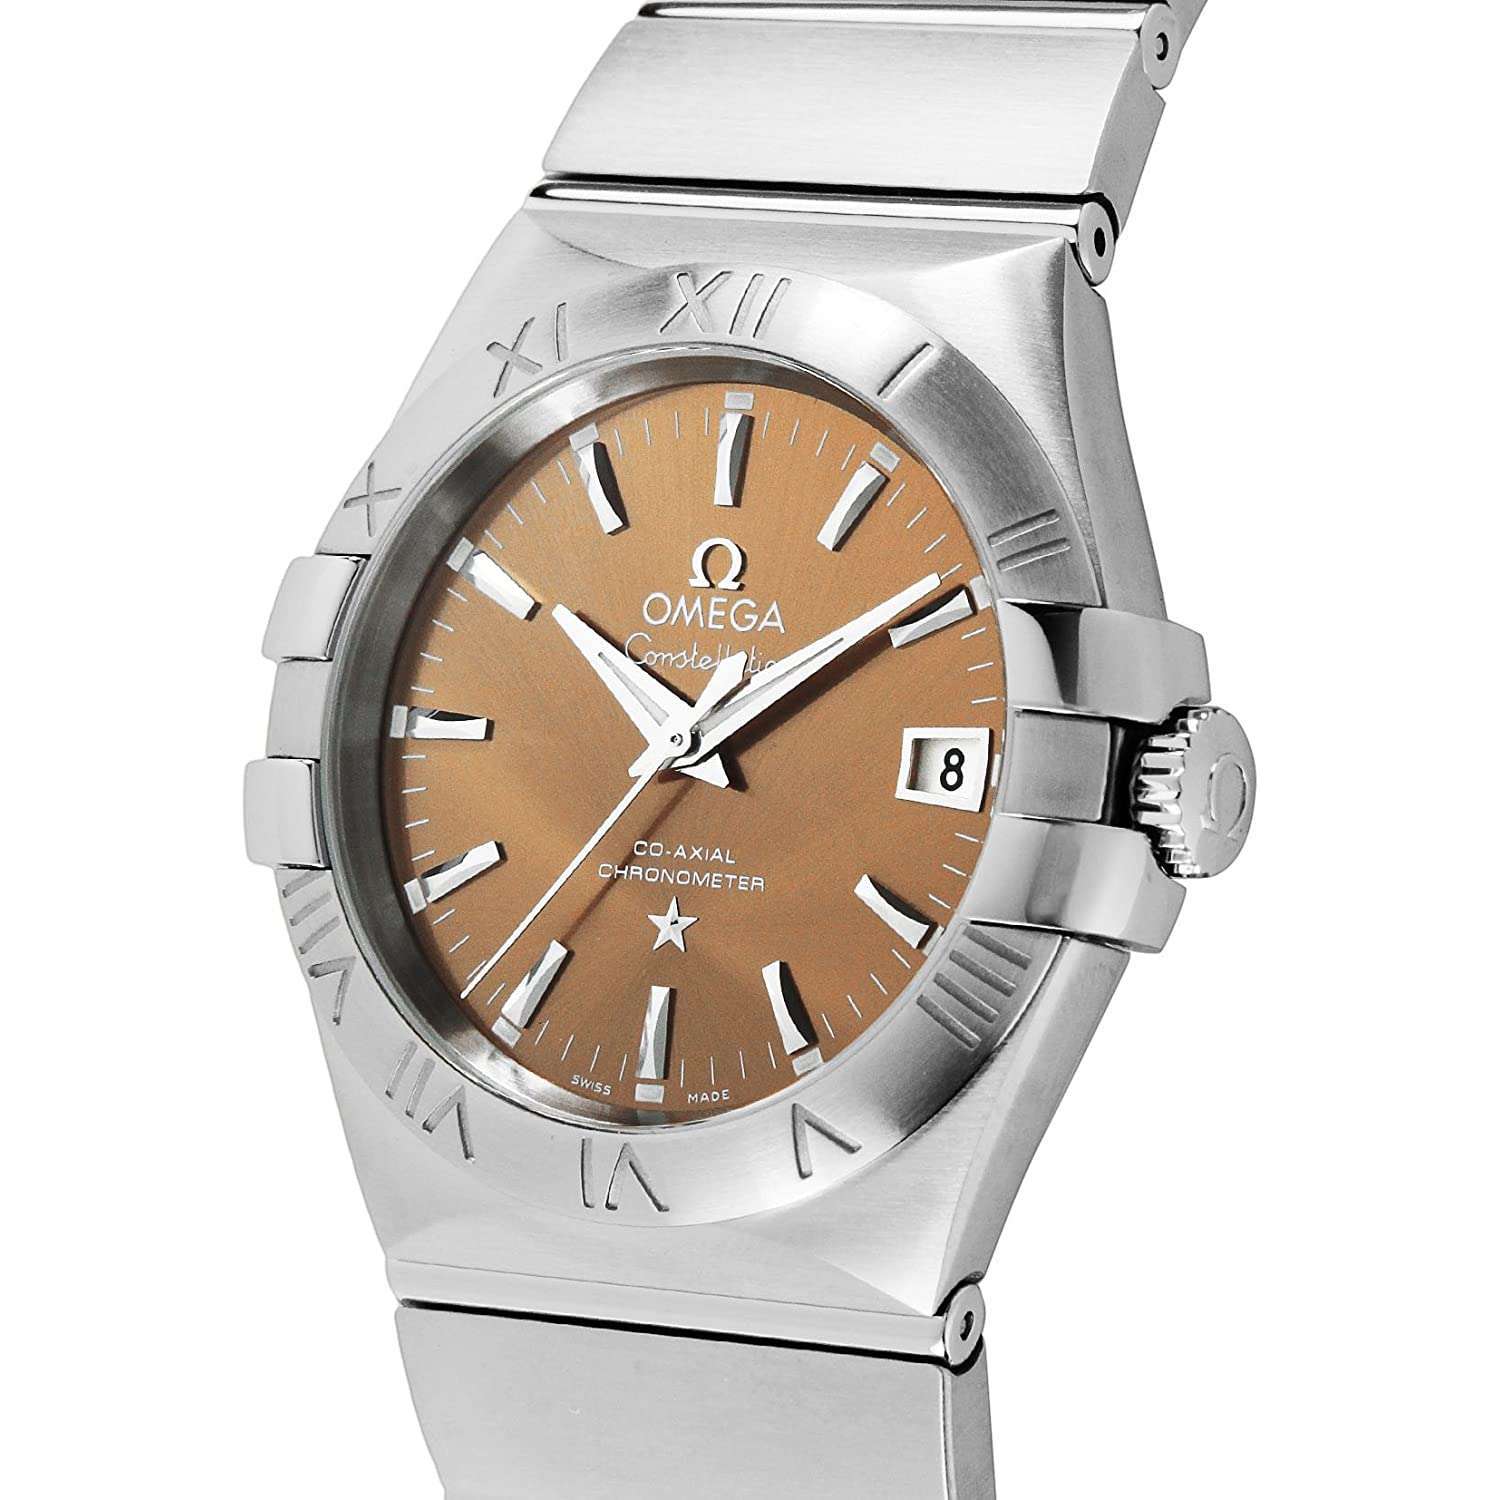 ROOK JAPAN:OMEGA CONSTELLATION C0-AXIAL CHRONOMETER 35MM MEN WATCH 123.10.35.20.10.001,Luxury Watch,Omega